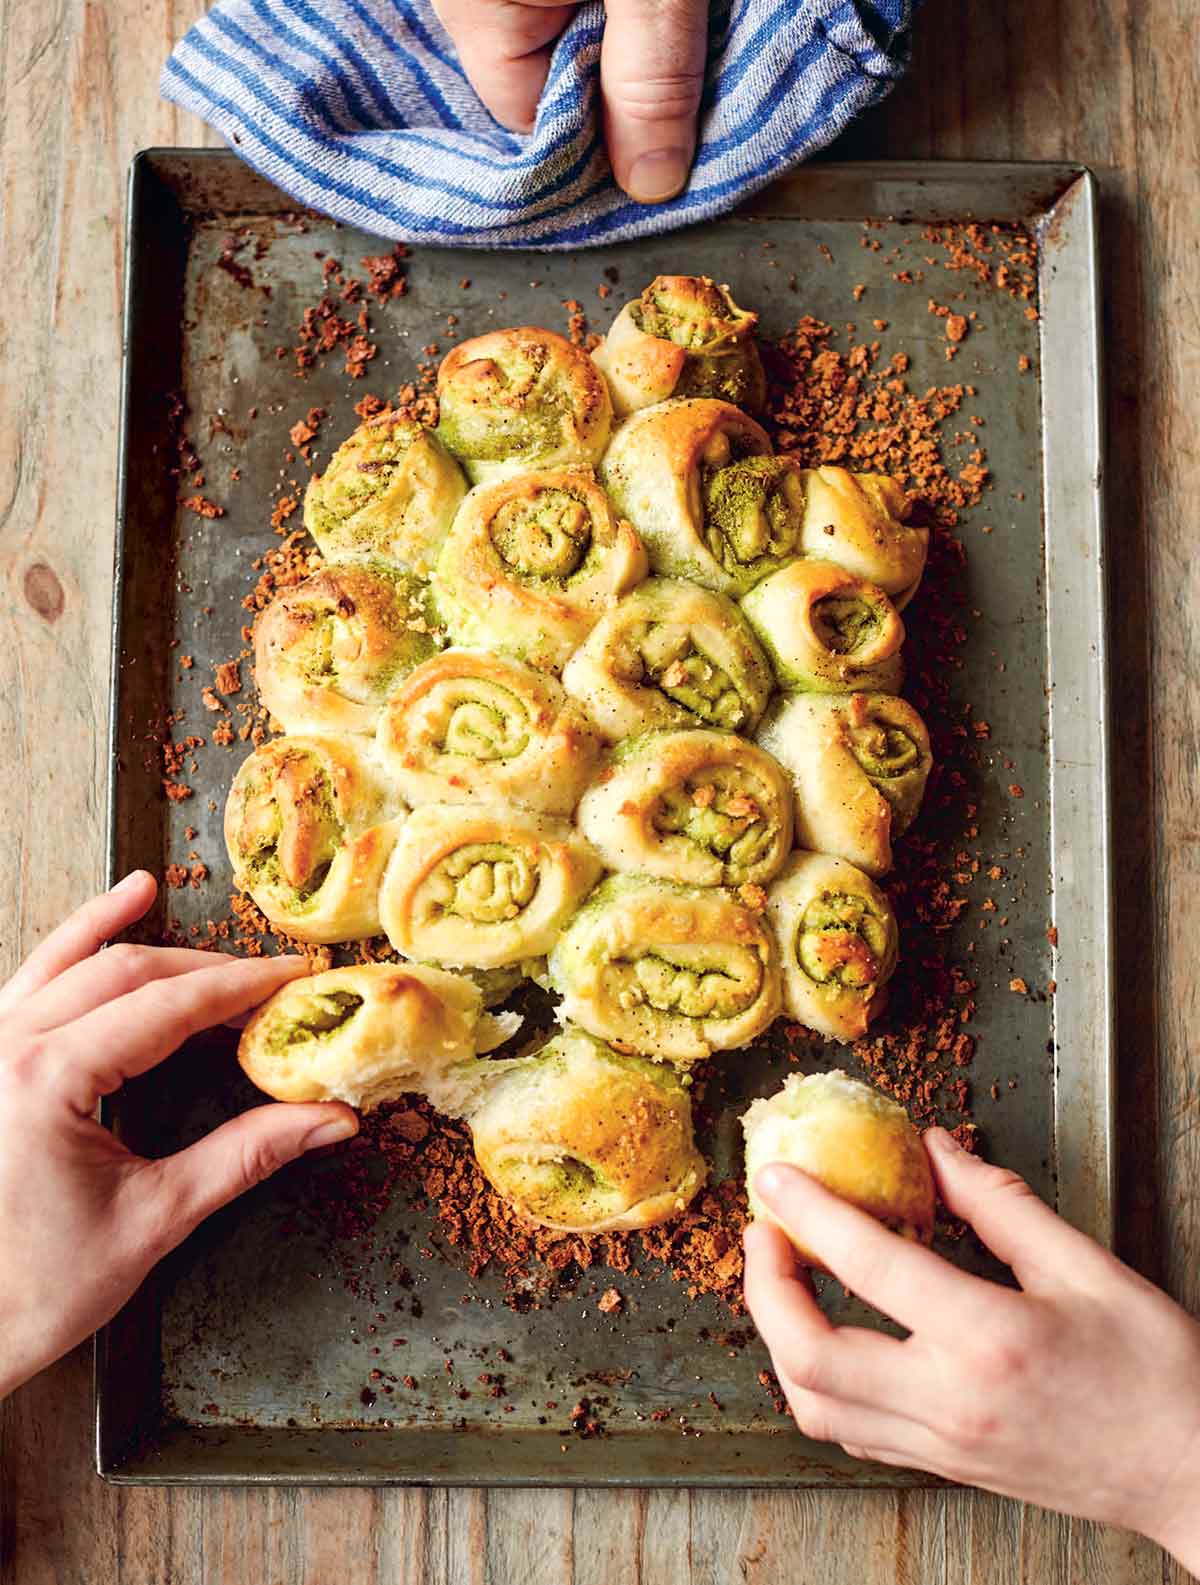 Jamie Oliver garlic rolls on a metal sheet pan, garnished with crispy bread crumbs, and being pulled apart by two hands.